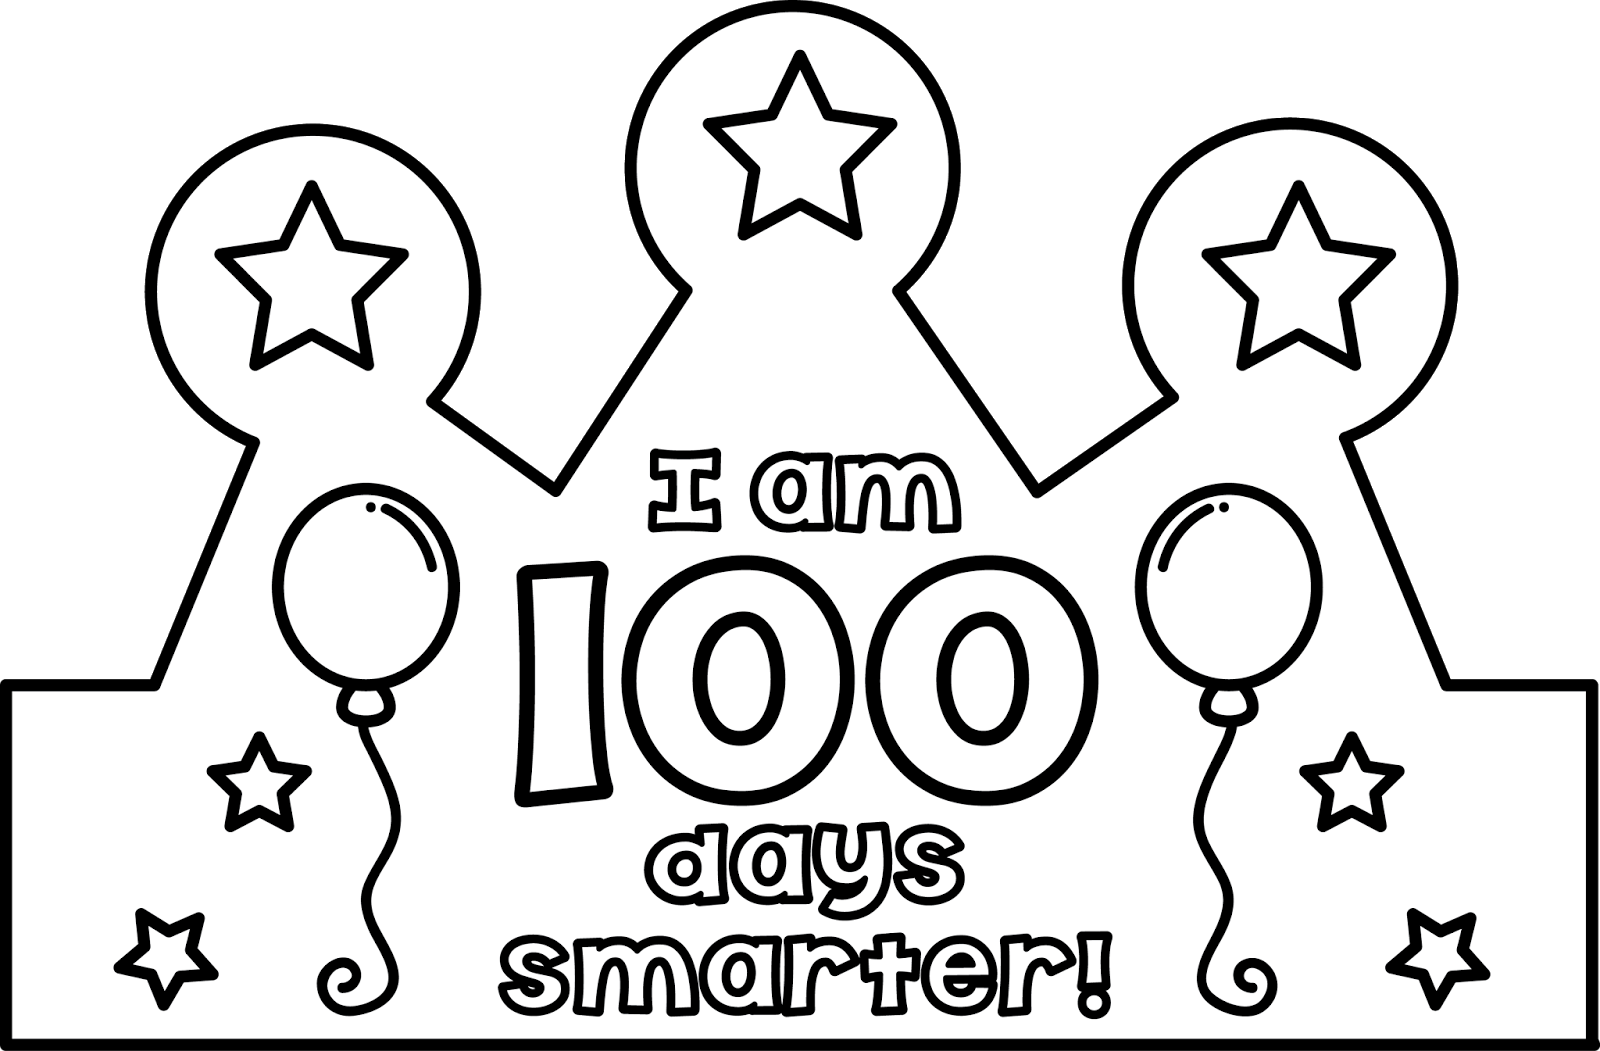 grandparents clipart 100th day